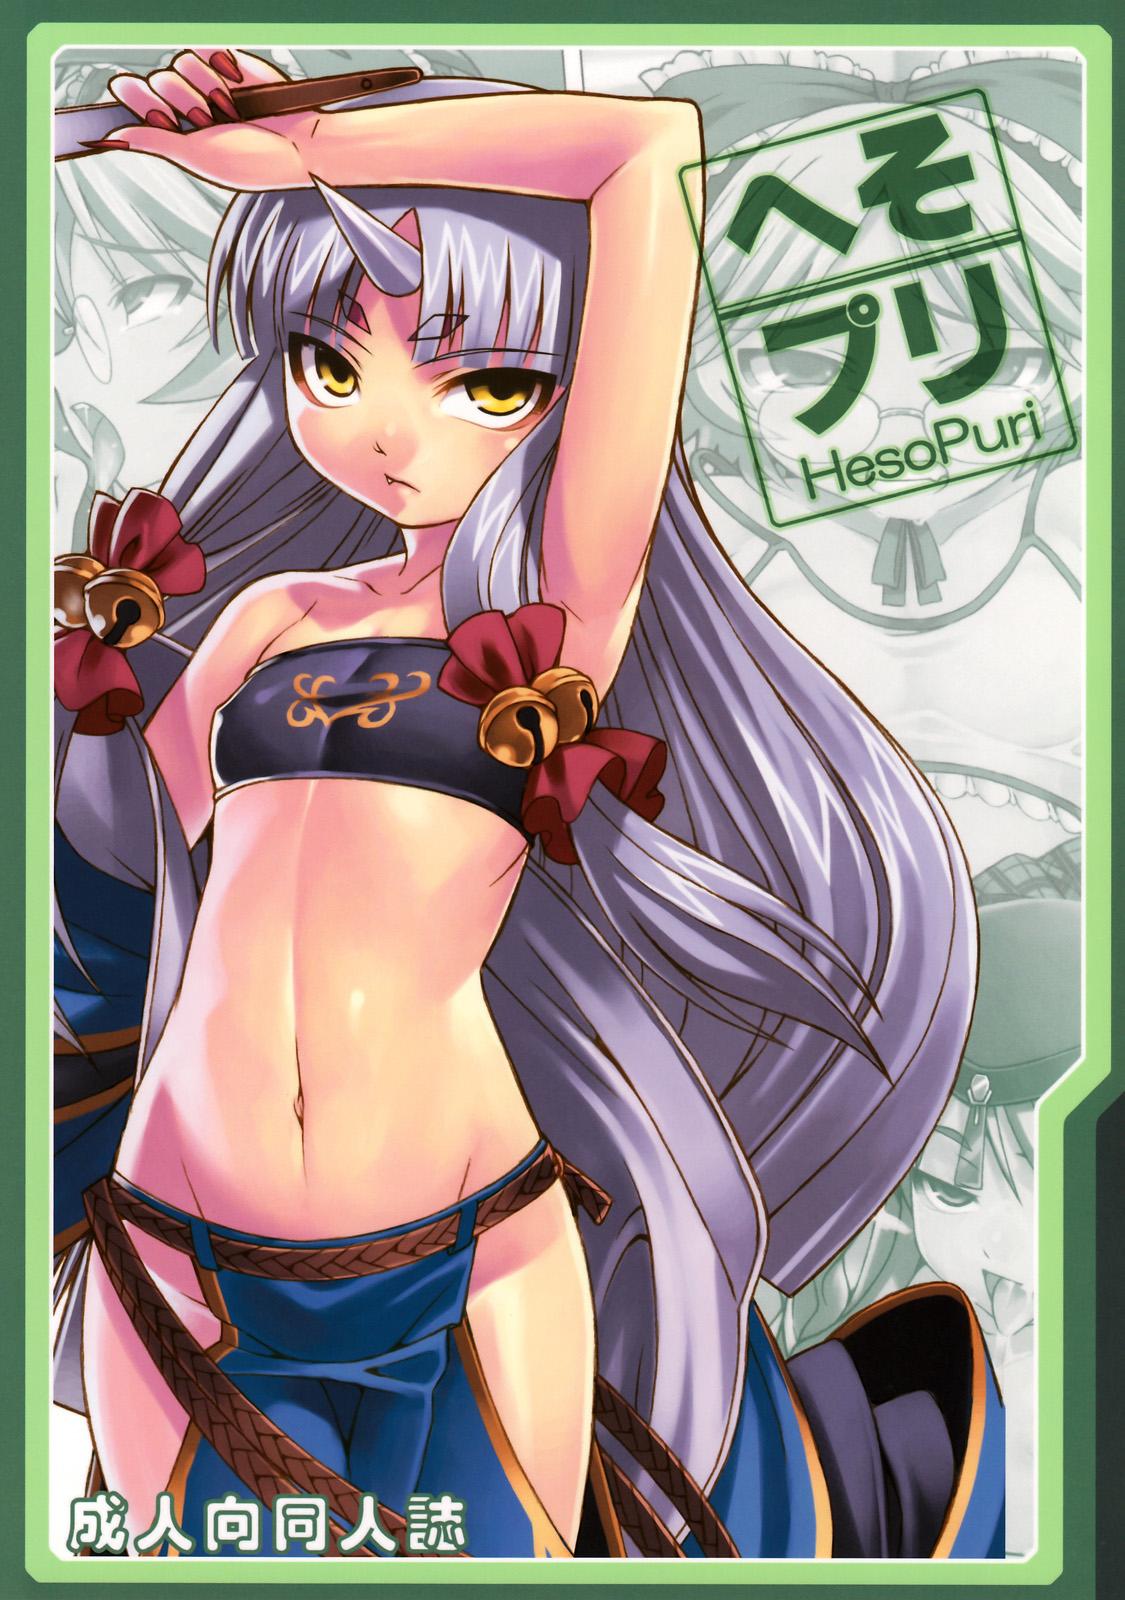 Chibola HesoPuri - Endless frontier Hooker - Picture 1